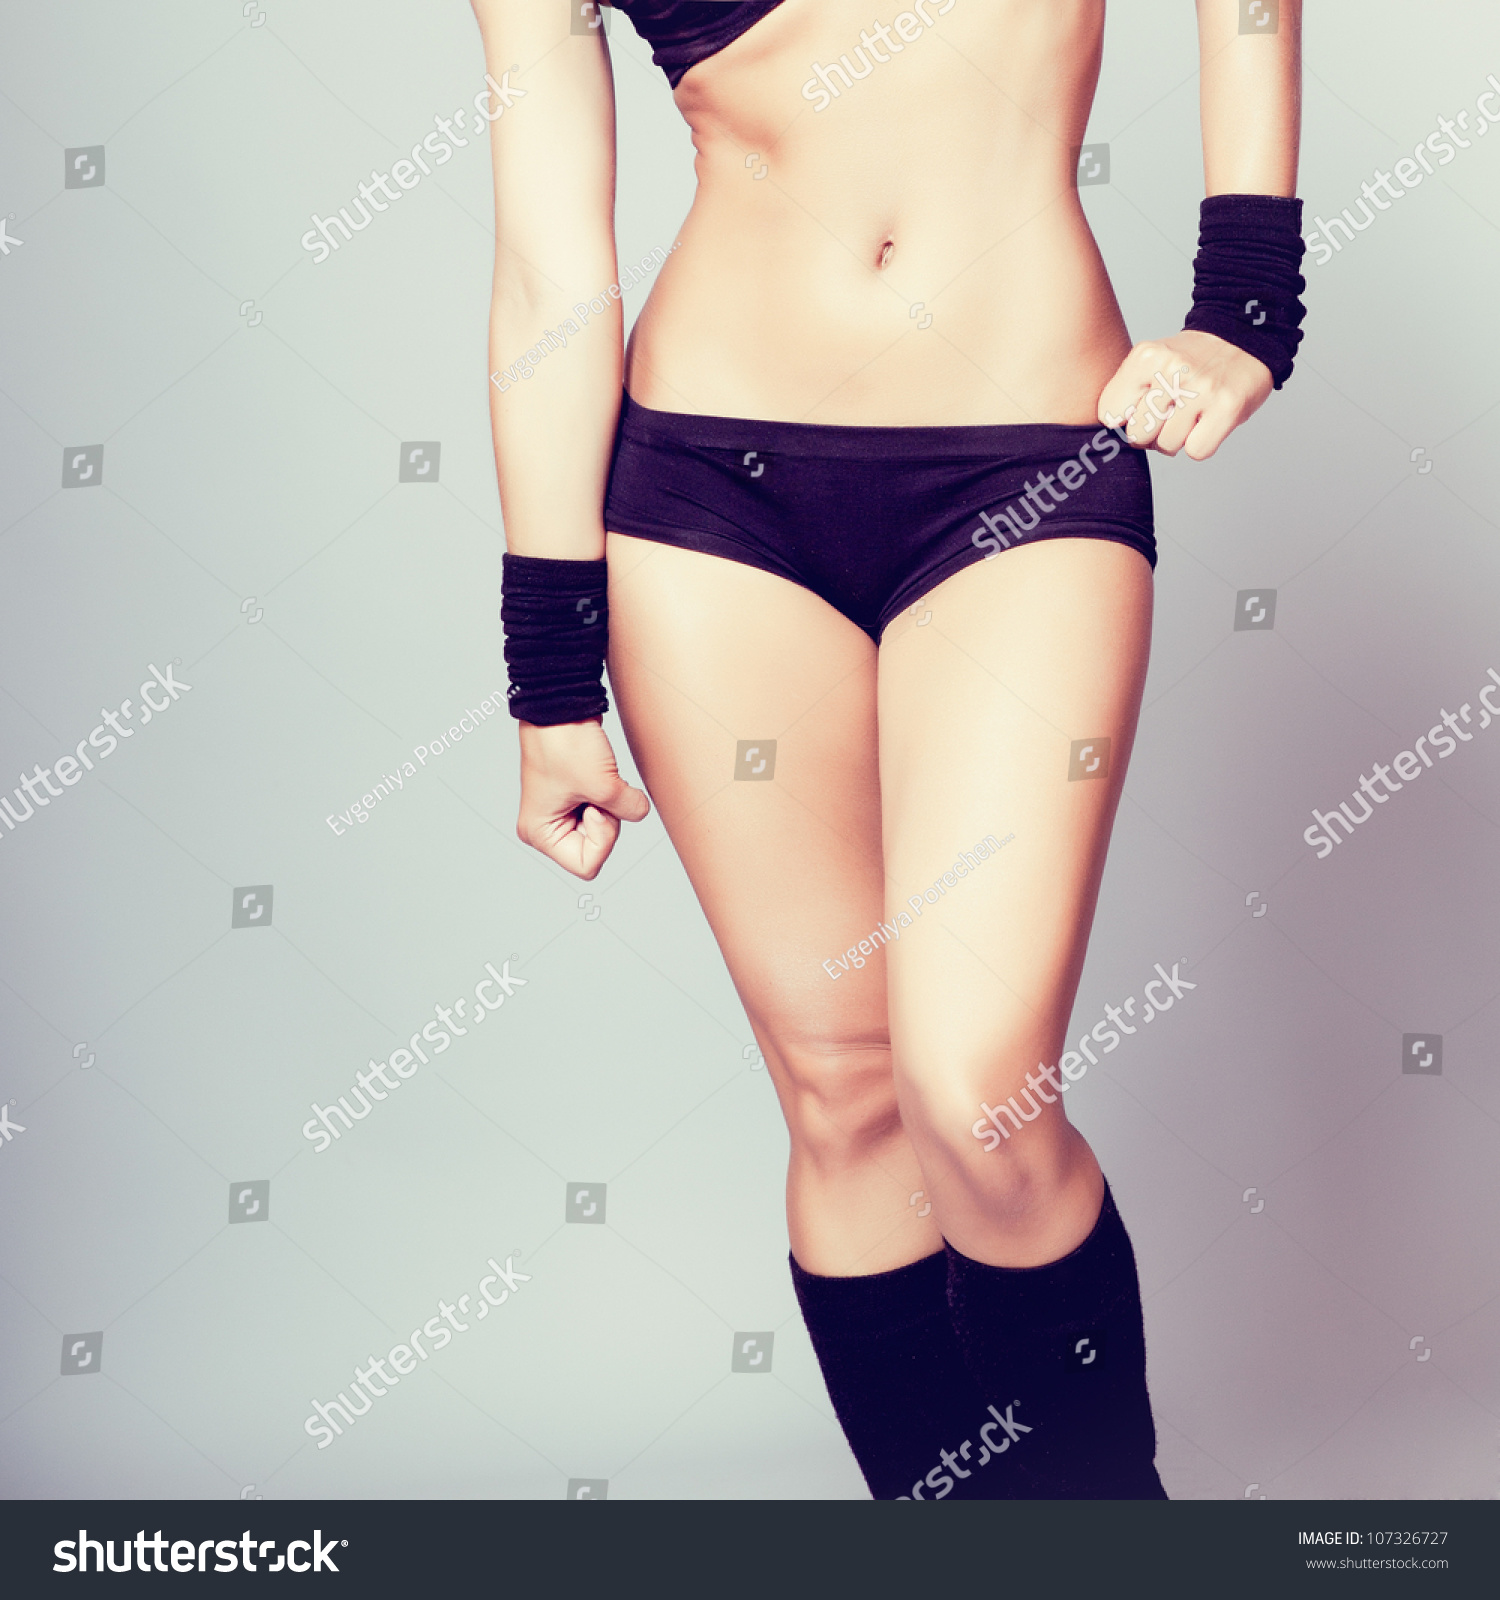 Midsection Woman Body Stock Photo (100% Legal Protection) 107326727 ...